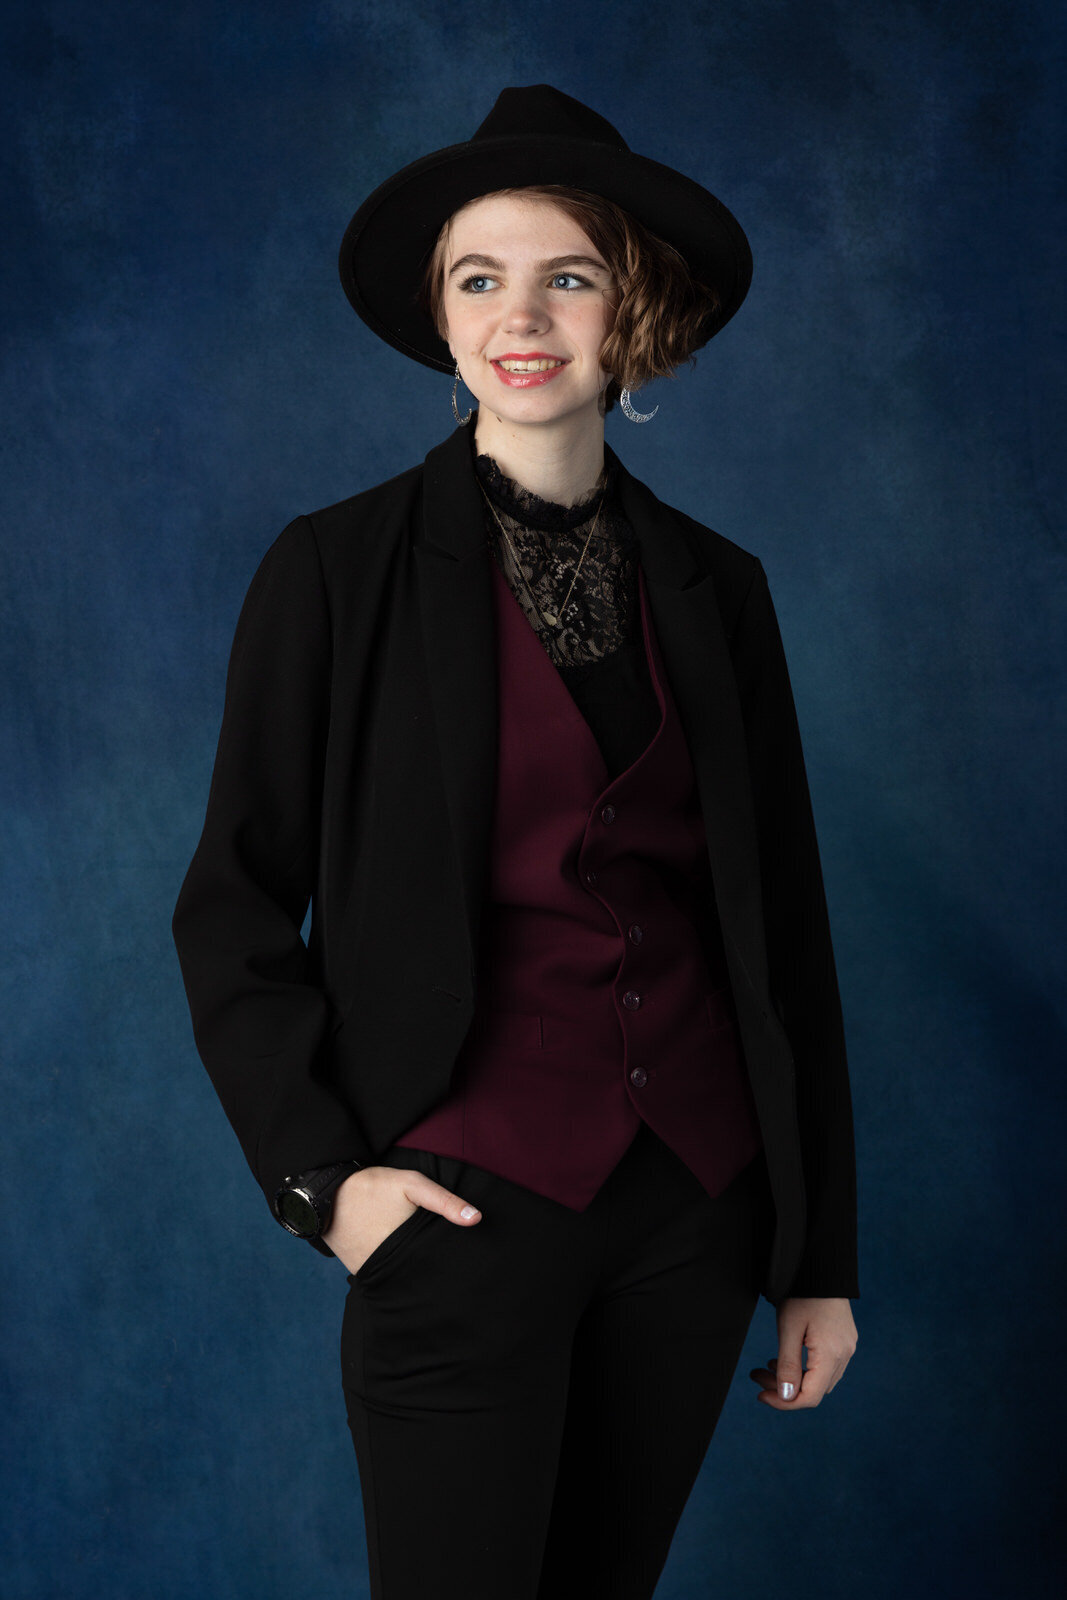 senior-girl-in-suit-and-moon-earing-and-fedora